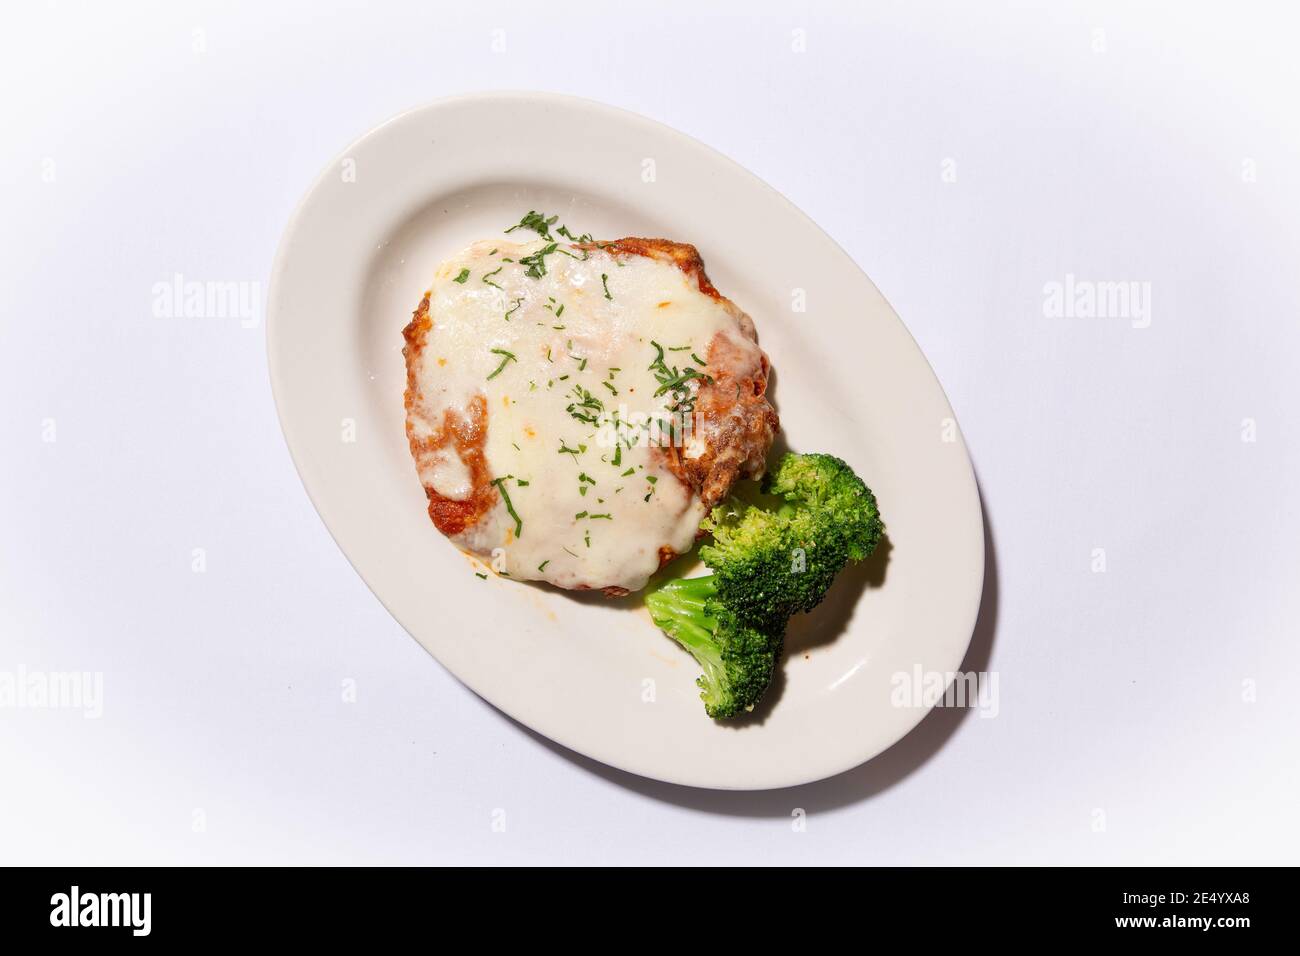 High Angle View of Veal Parmesan with Broccoli Stock Photo